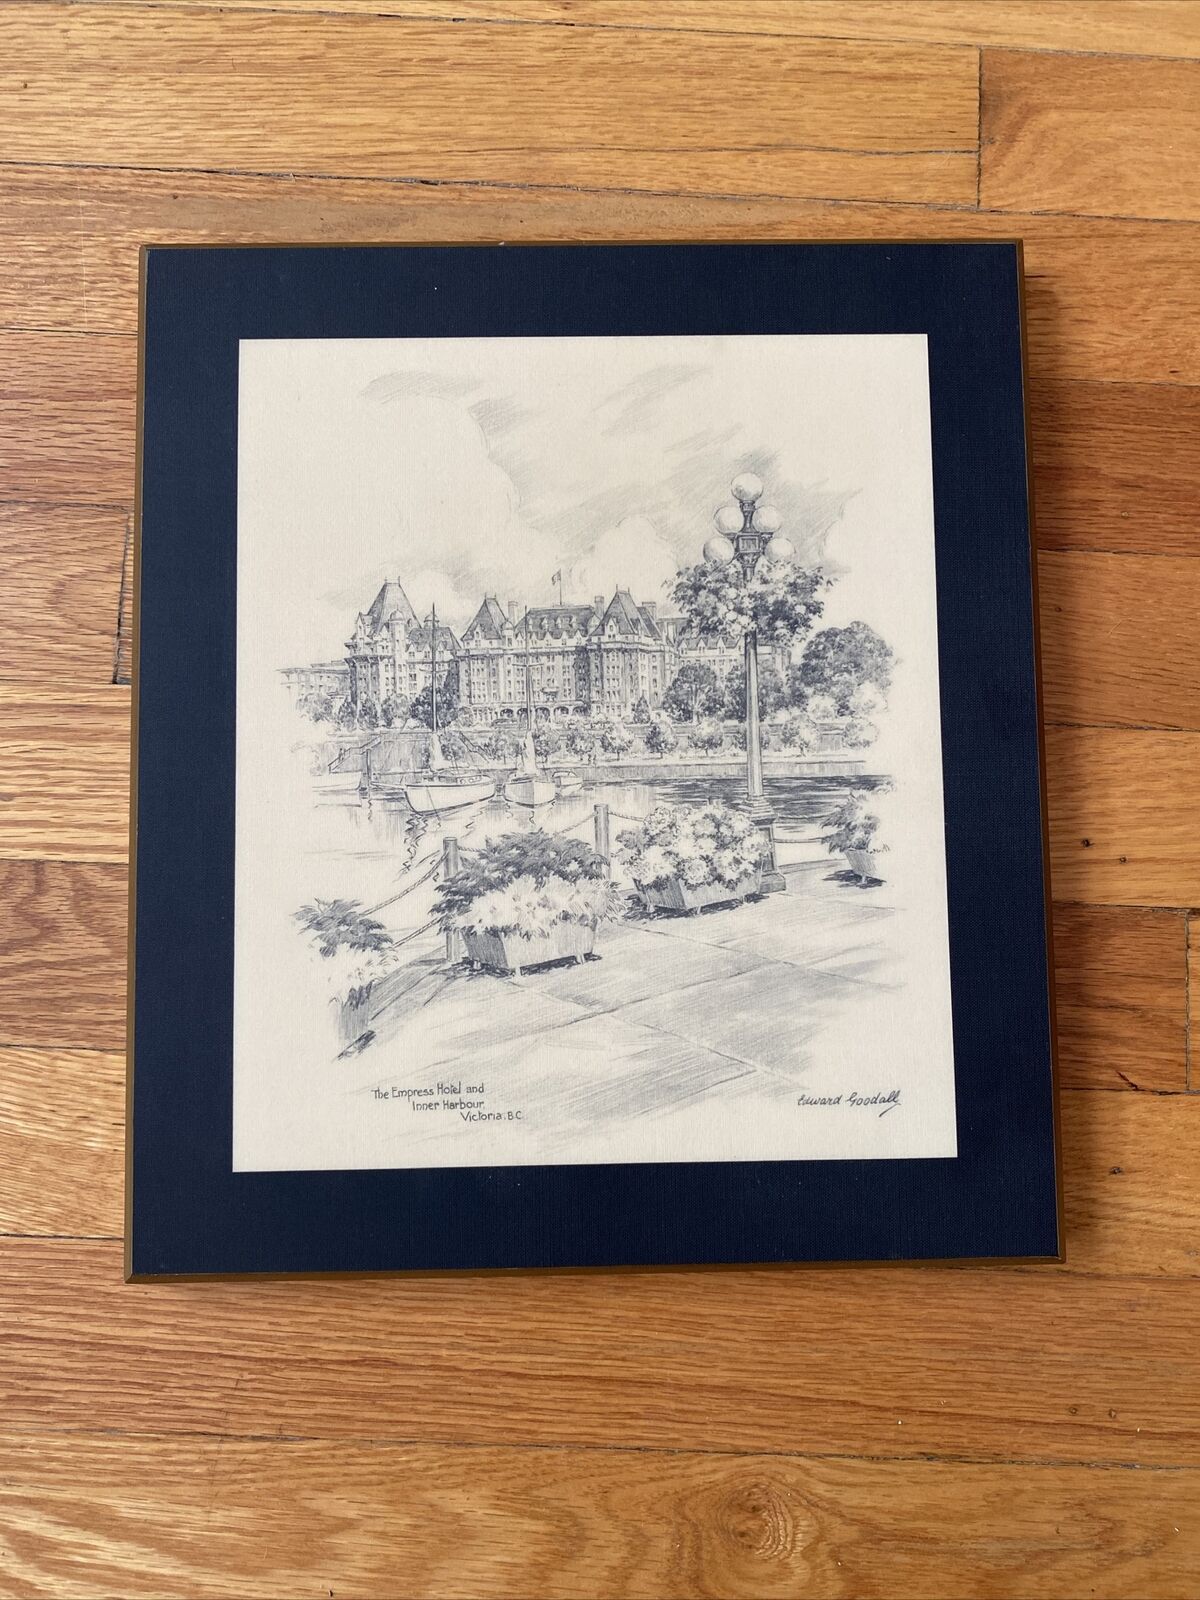 Wood Wall Plaque THE EMPRESS HOTEL AND INNER HARBOUR VICTORIA BC Print 11X12”